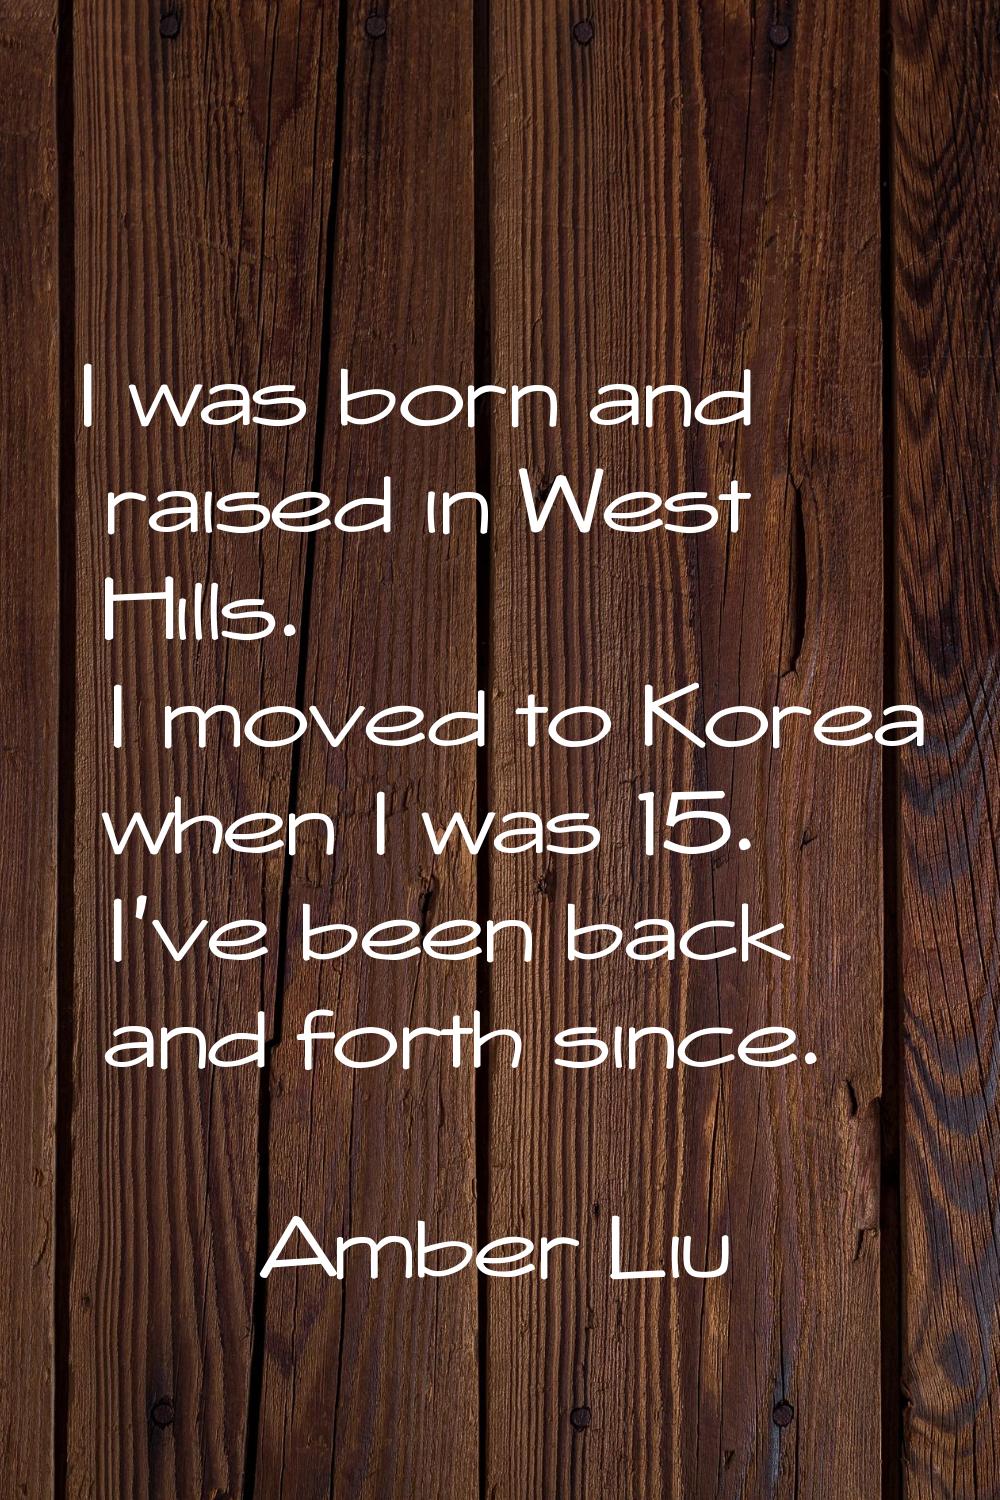 I was born and raised in West Hills. I moved to Korea when I was 15. I've been back and forth since